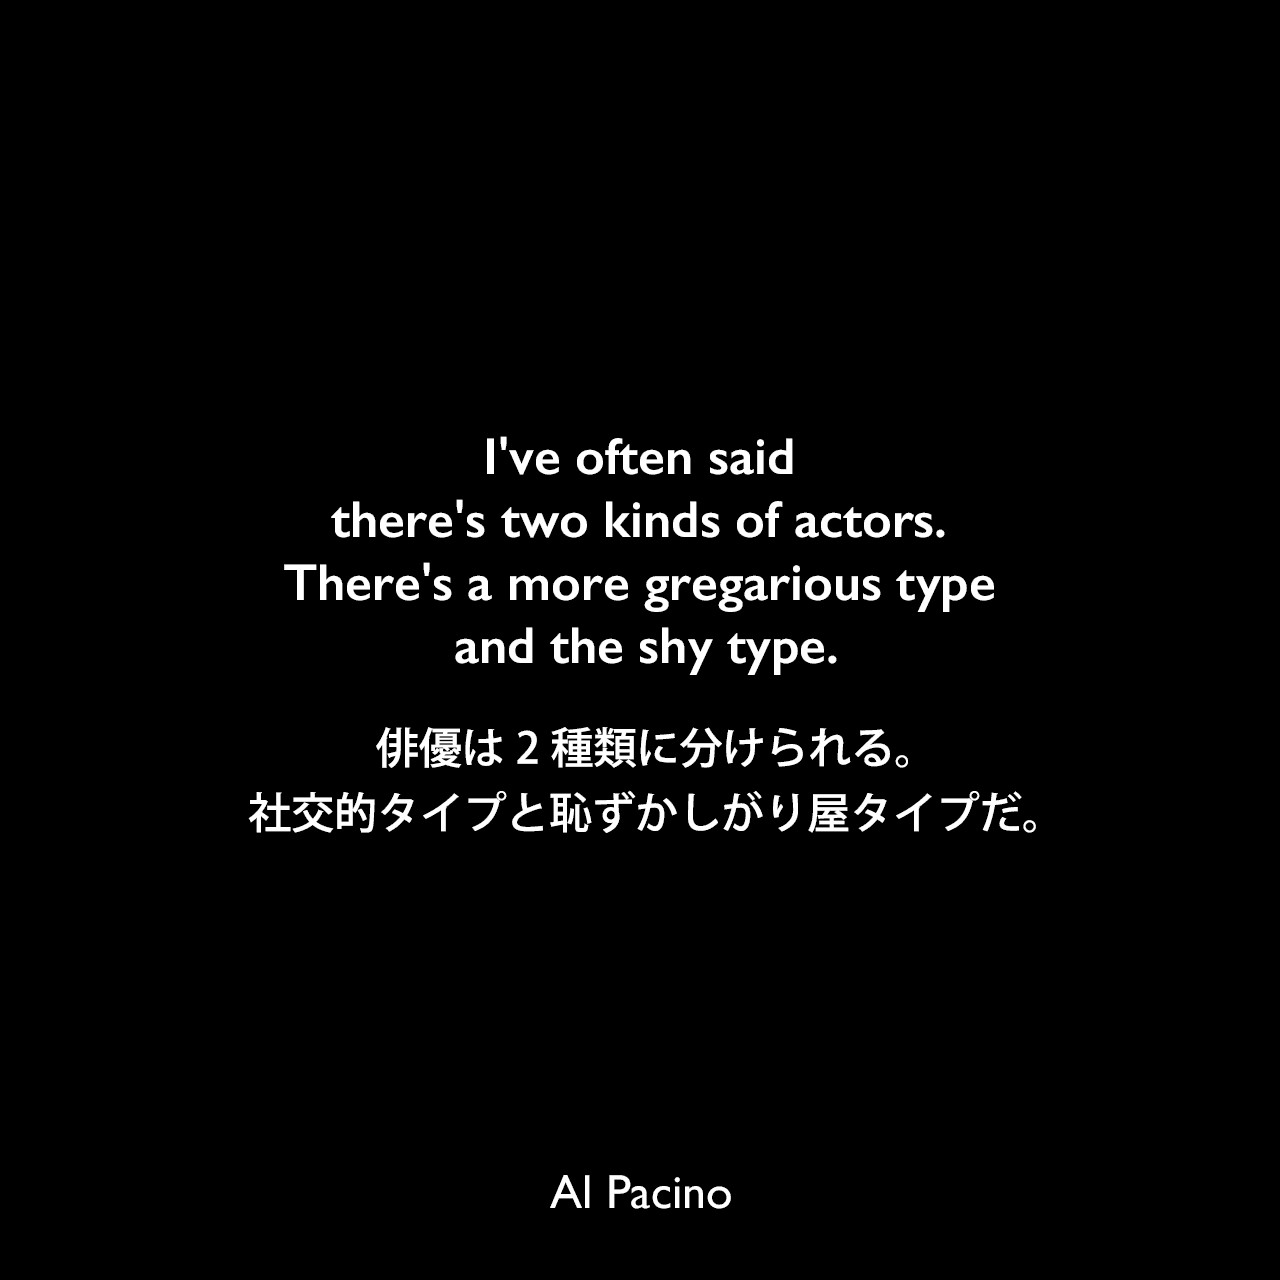 I've often said there's two kinds of actors. There's a more gregarious type and the shy type.俳優は2種類に分けられる。社交的タイプと恥ずかしがり屋タイプだ。Al Pacino